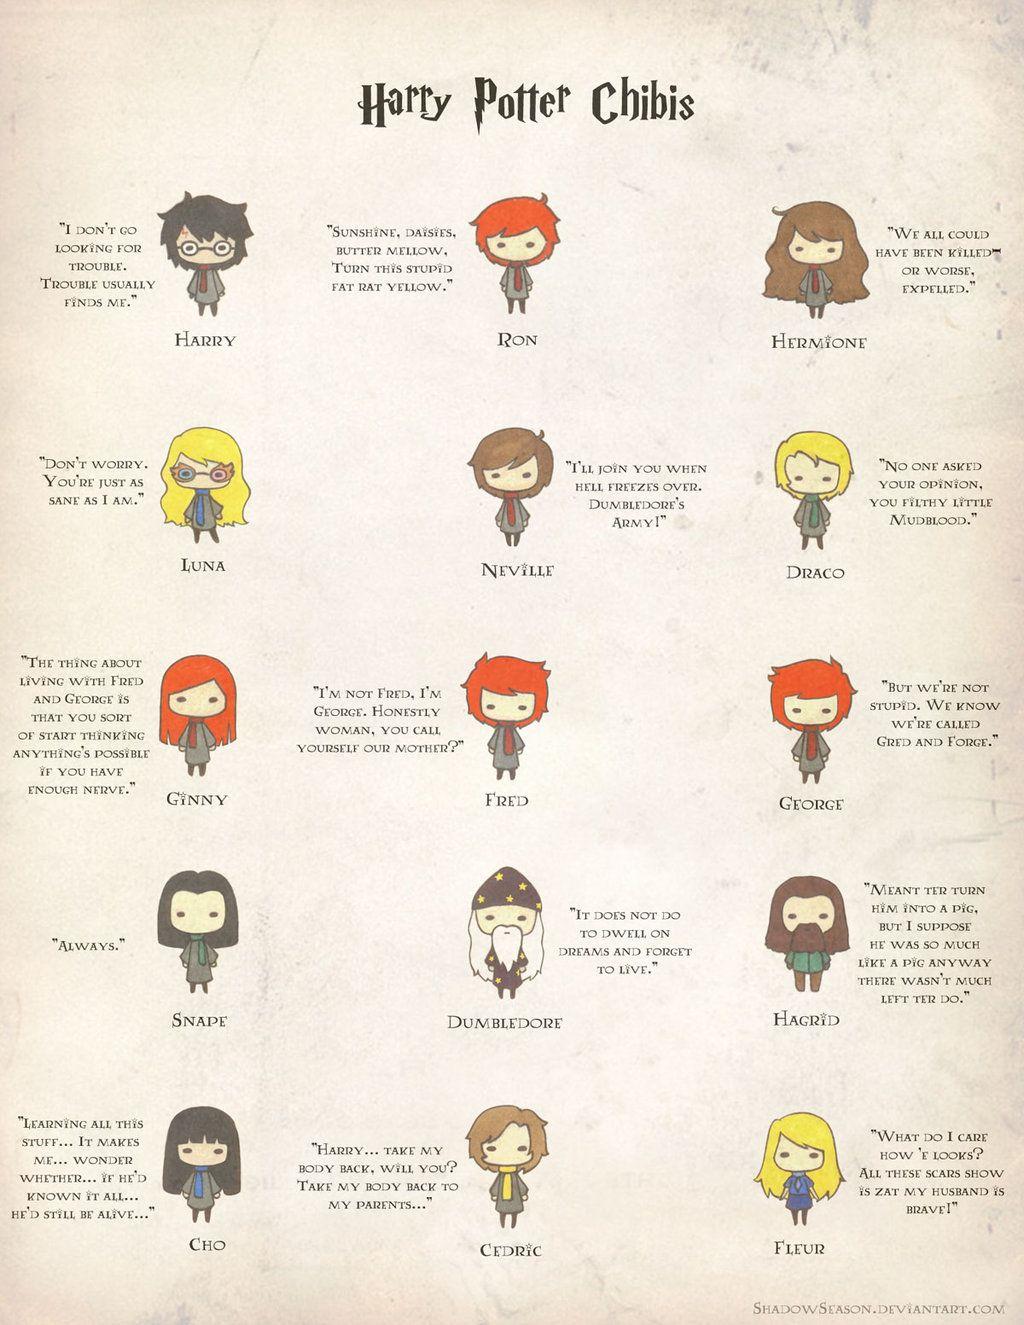 Harry Potter characters and iconic quotes.